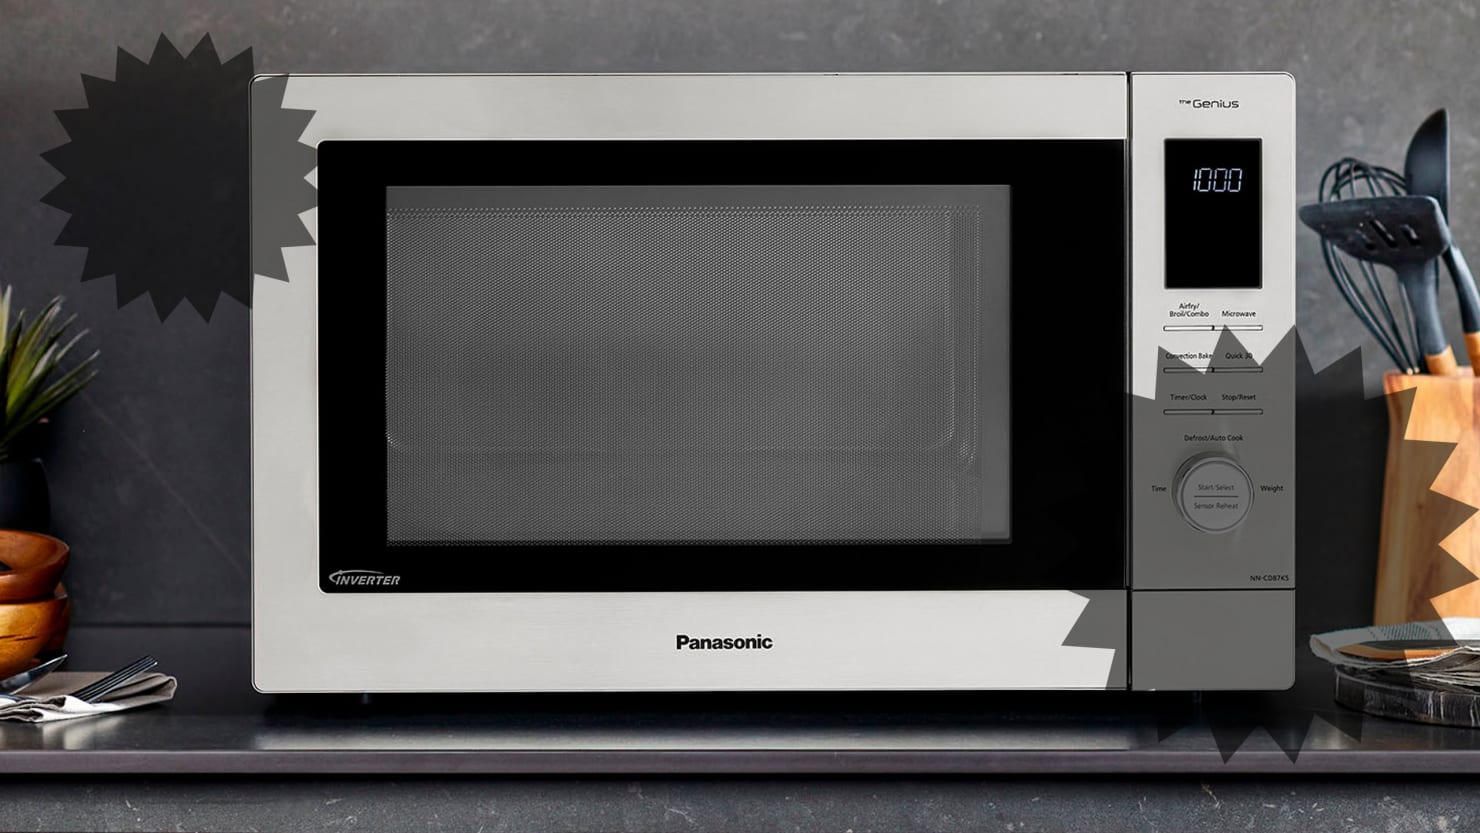 Panasonic HomeCHEF 7-in-1 Compact Oven with Convection Bake (Black)